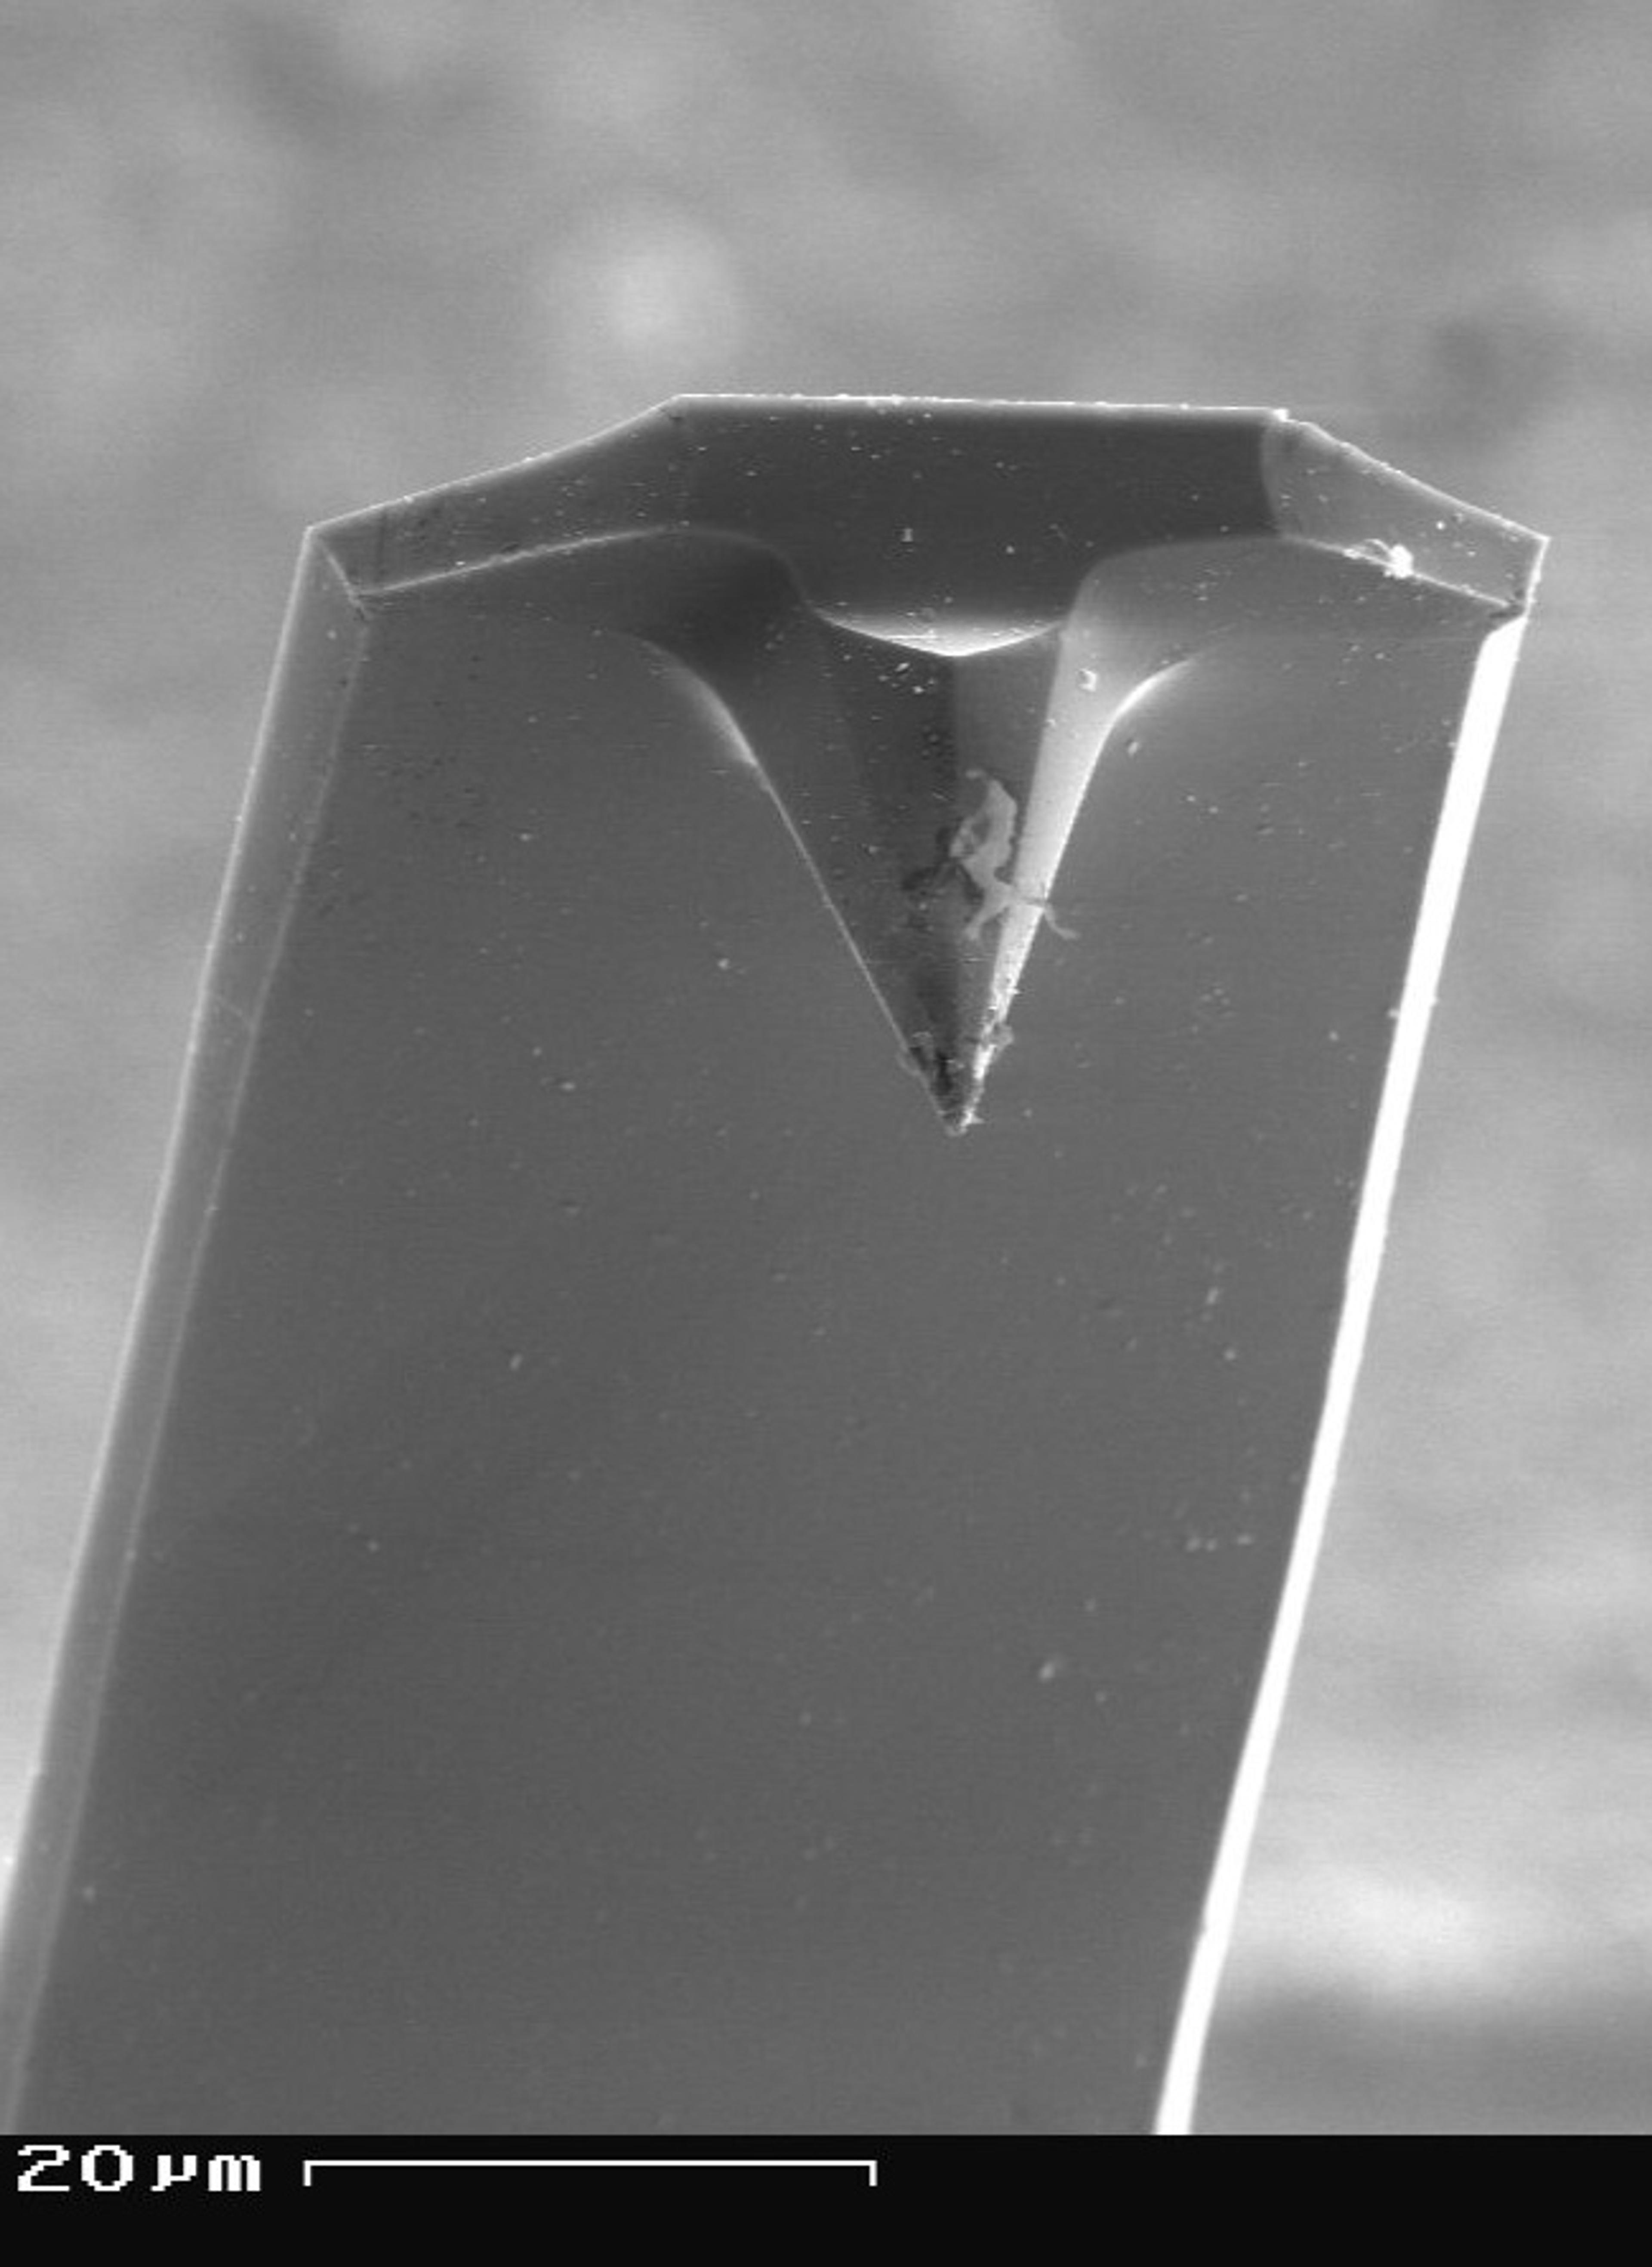 AFM cantilever in scanning electron microscope magnification 